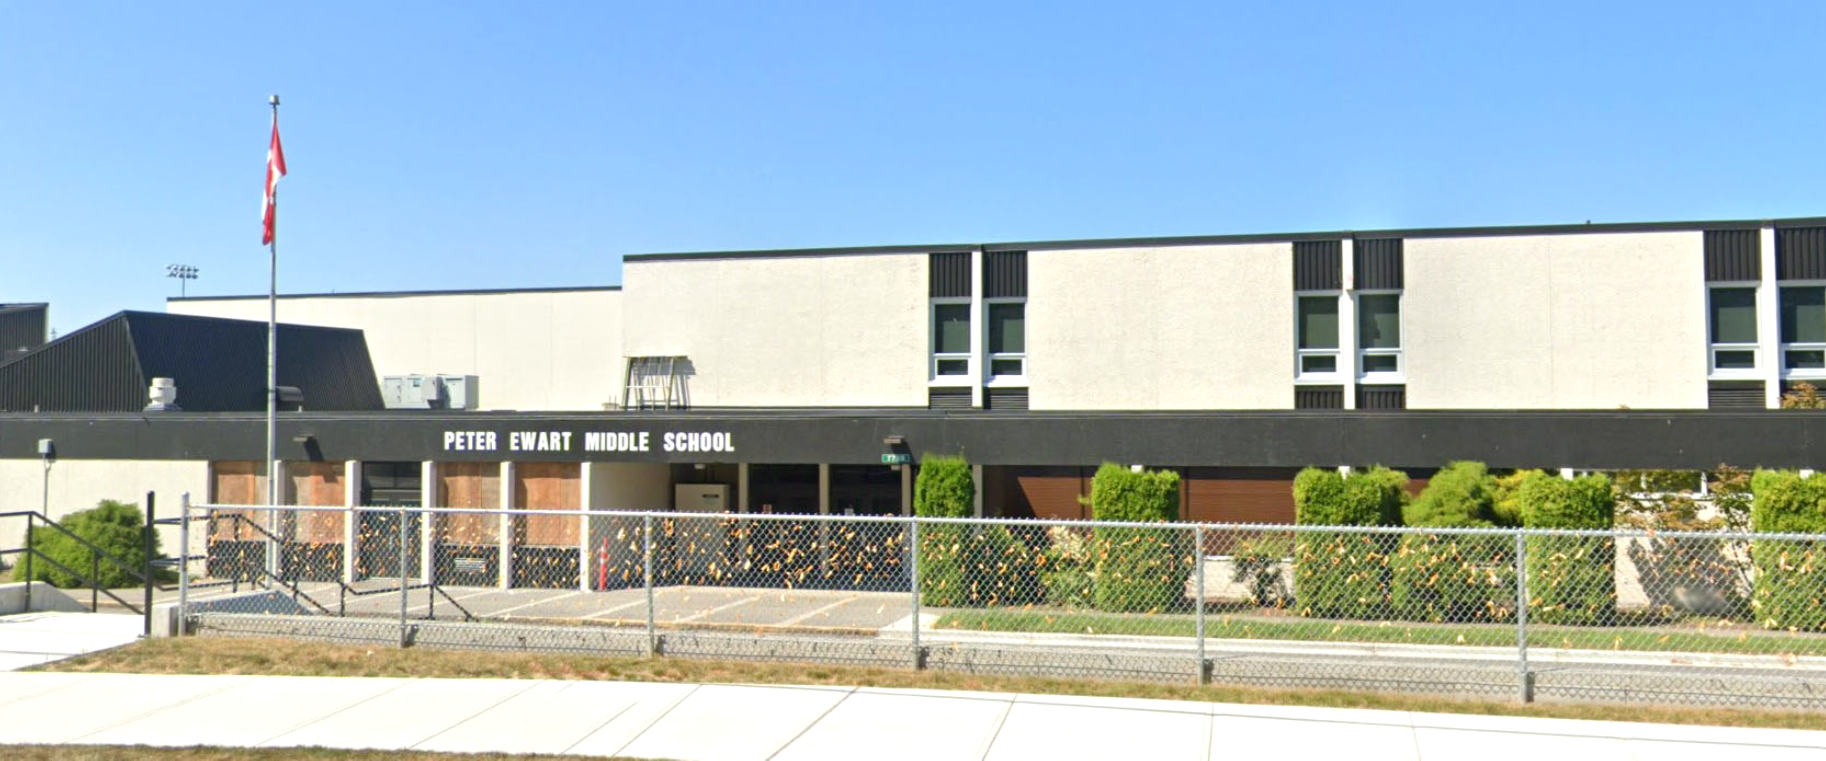 Front view image of Peter Ewart Middle School